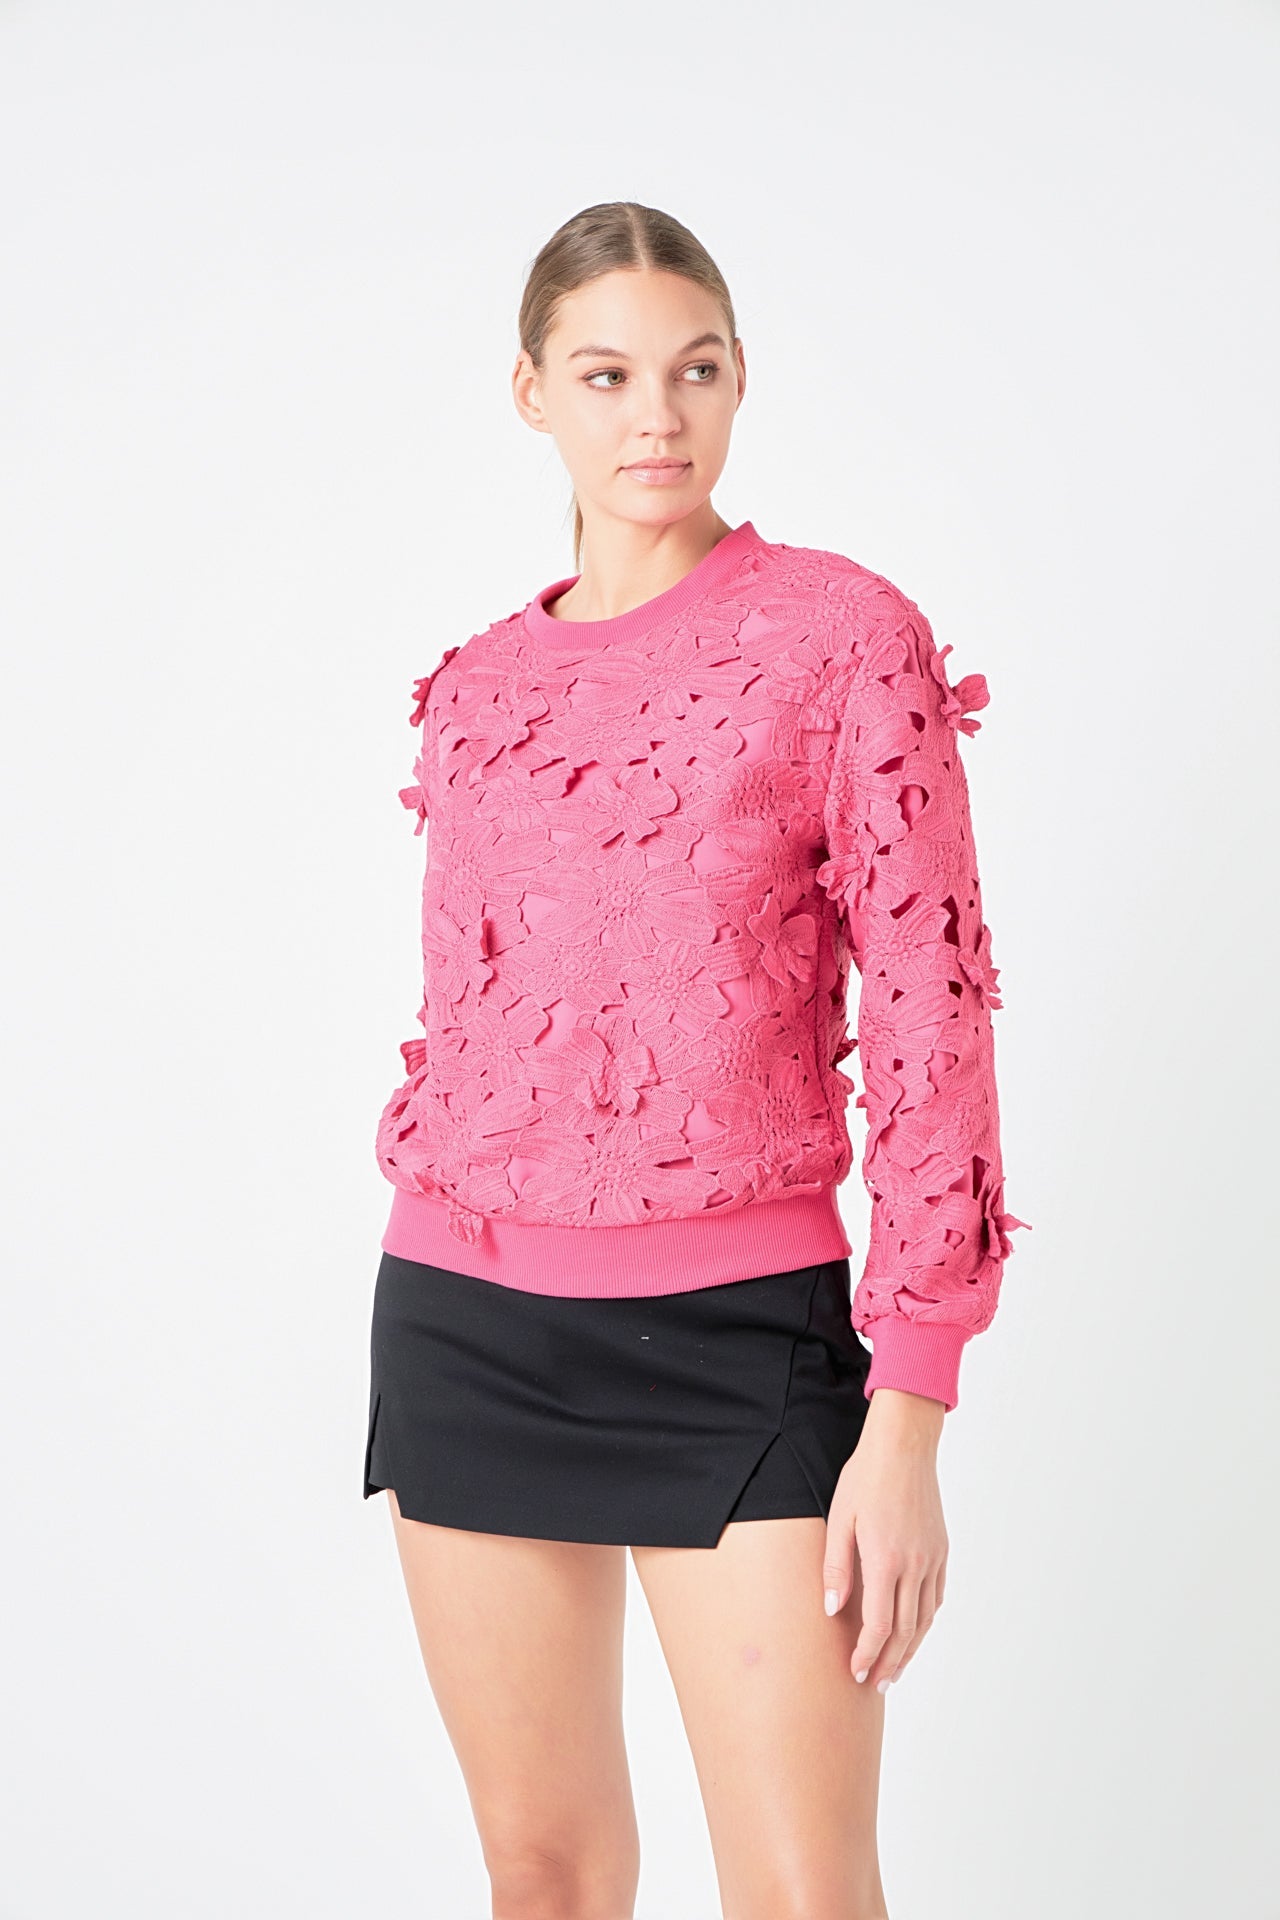 ENDLESS ROSE - Floral Lace Sweater - HOODIES &SWEATSHIRTS available at Objectrare